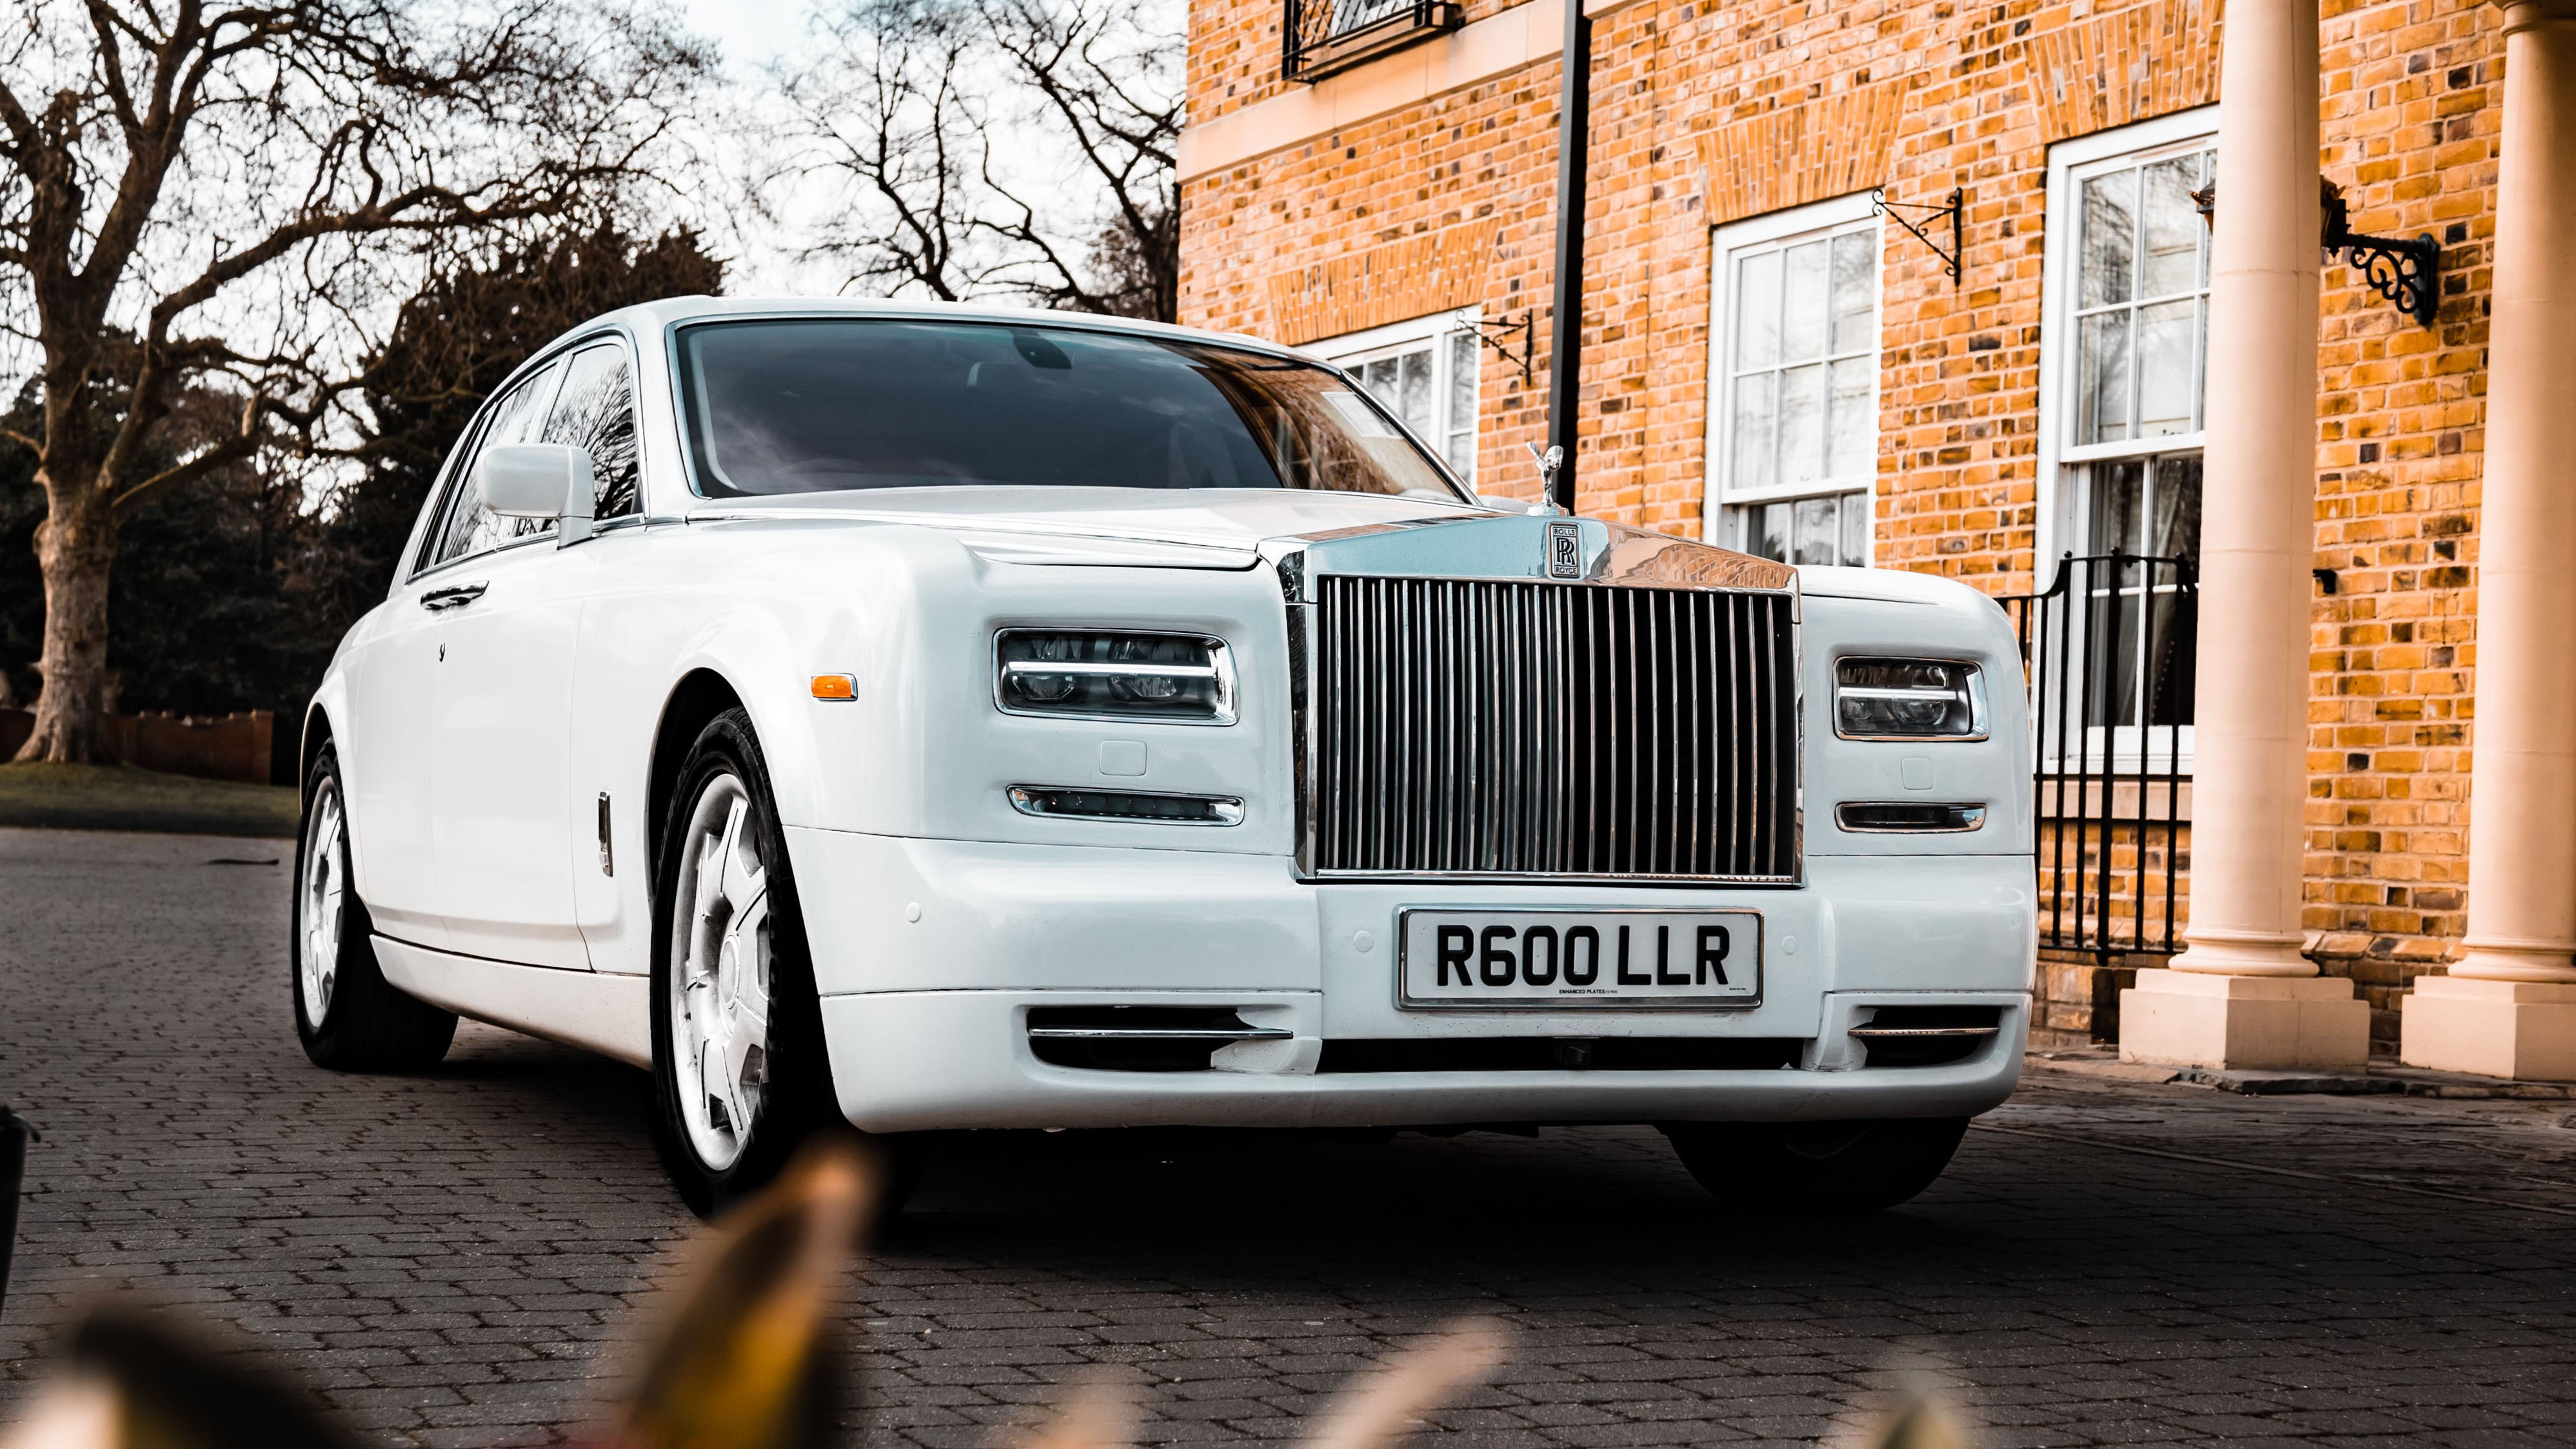 Modern white Rolls-Royce Phantom with its large chrome alloy wheels and iconic chrome front grill in attendance at a popular wedding venue in Harlow in Essex.